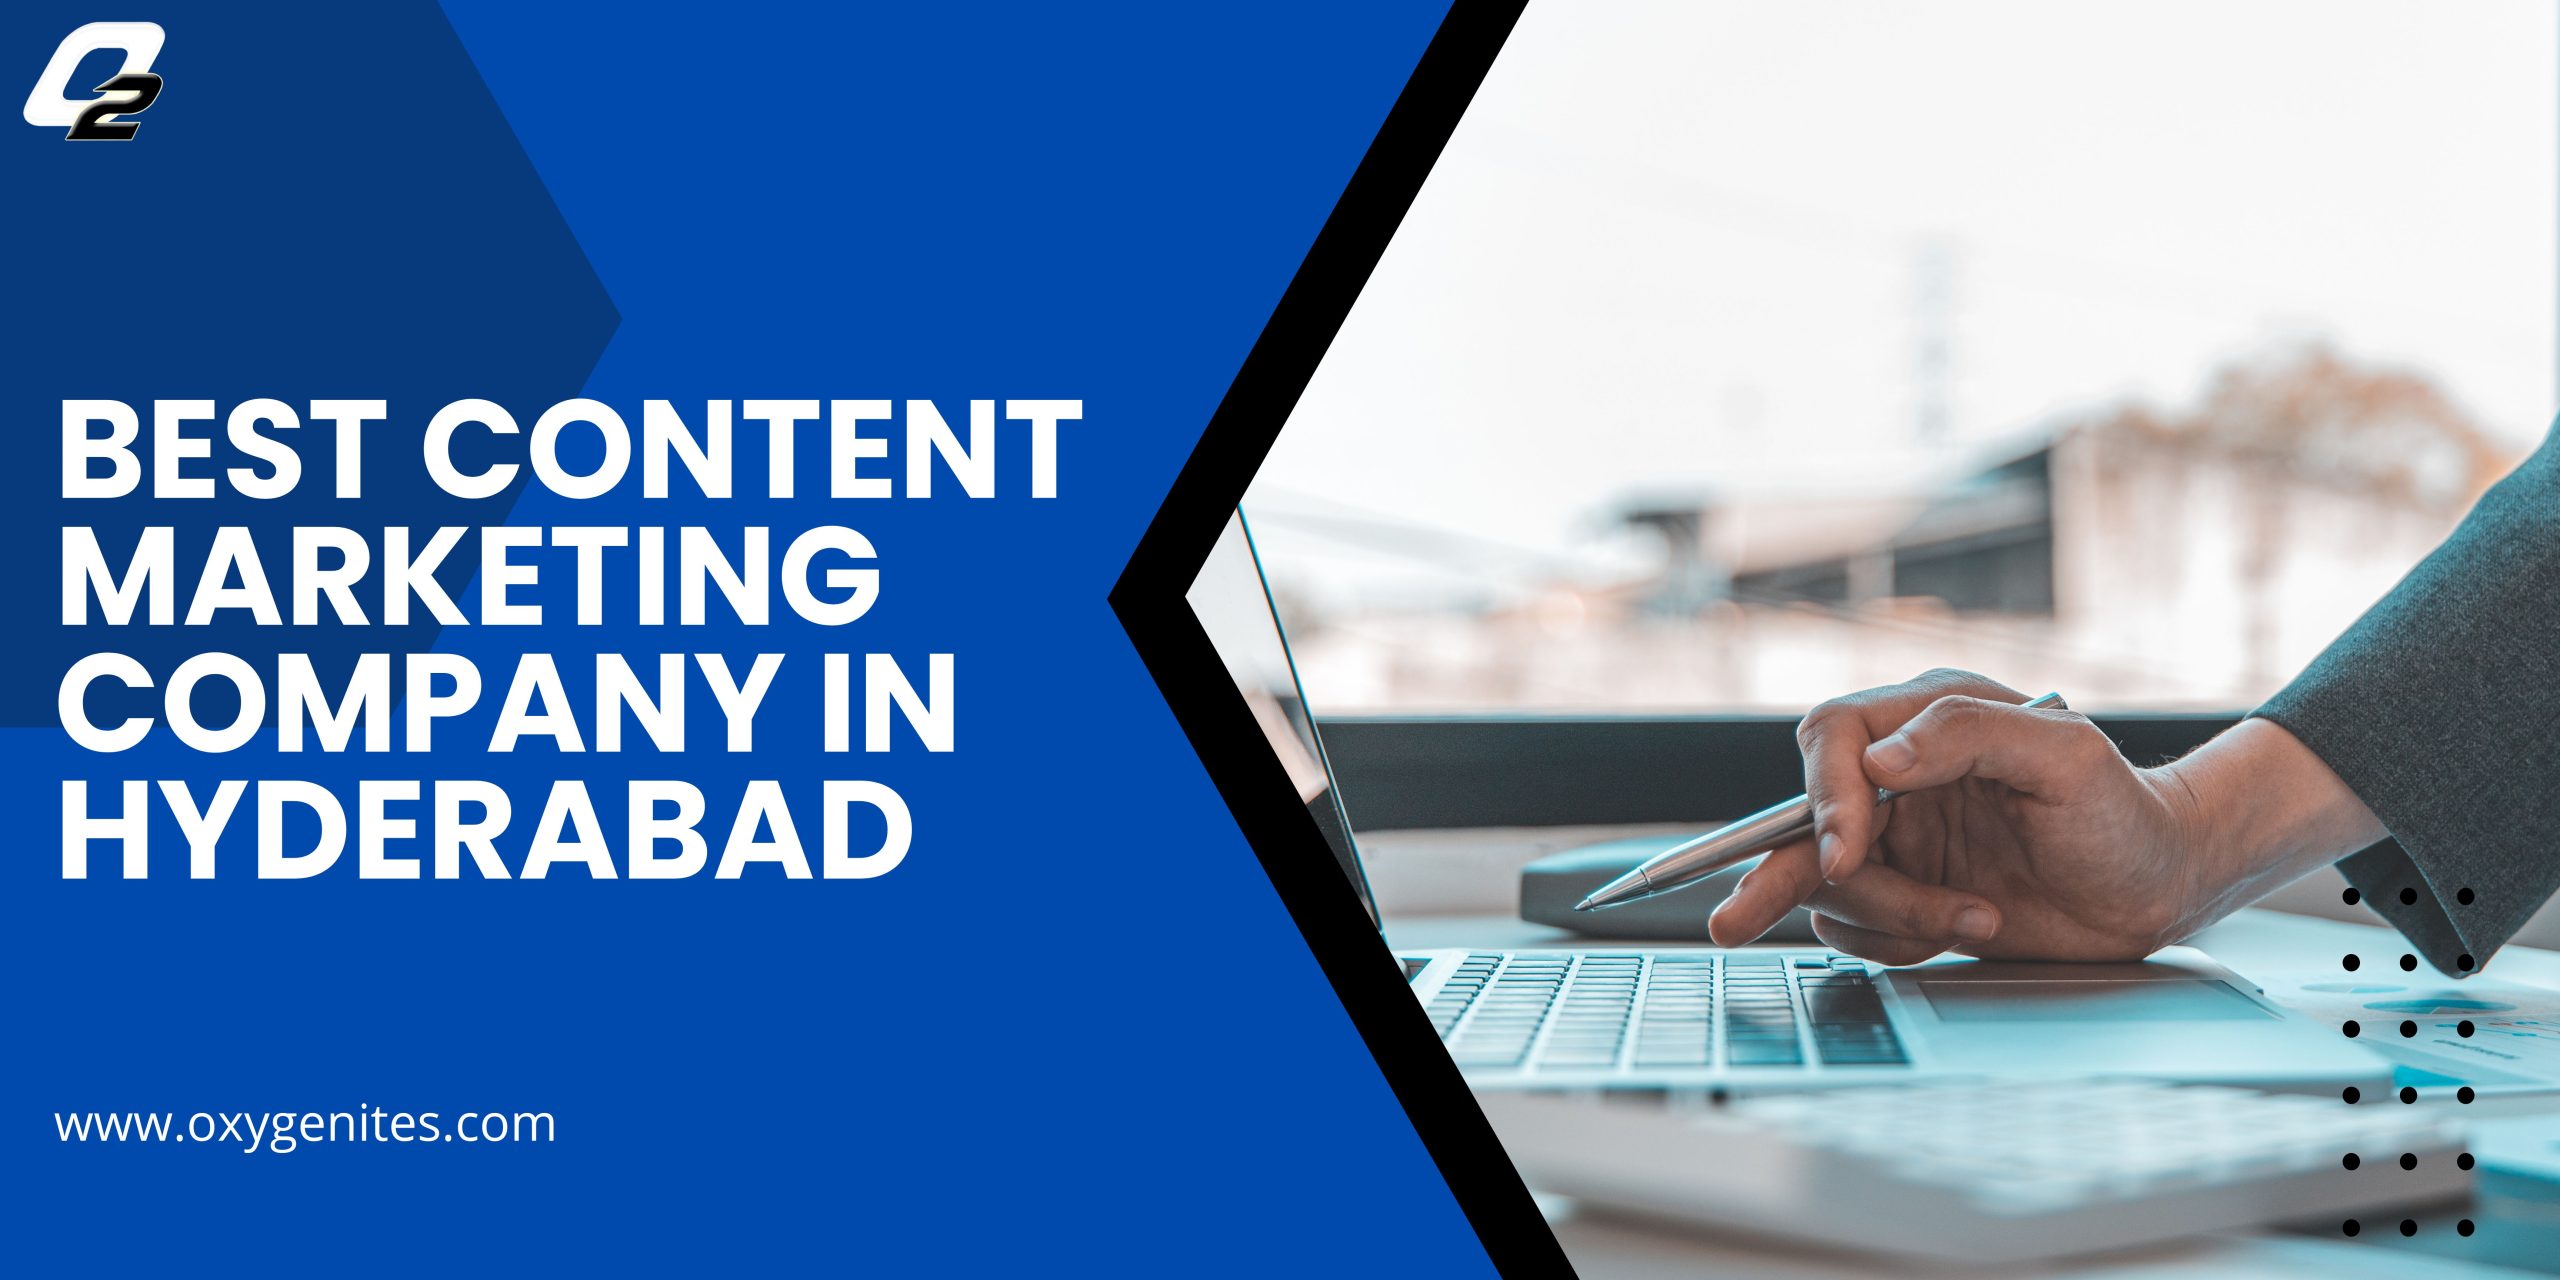 Content Marketing Company In Hyderabad